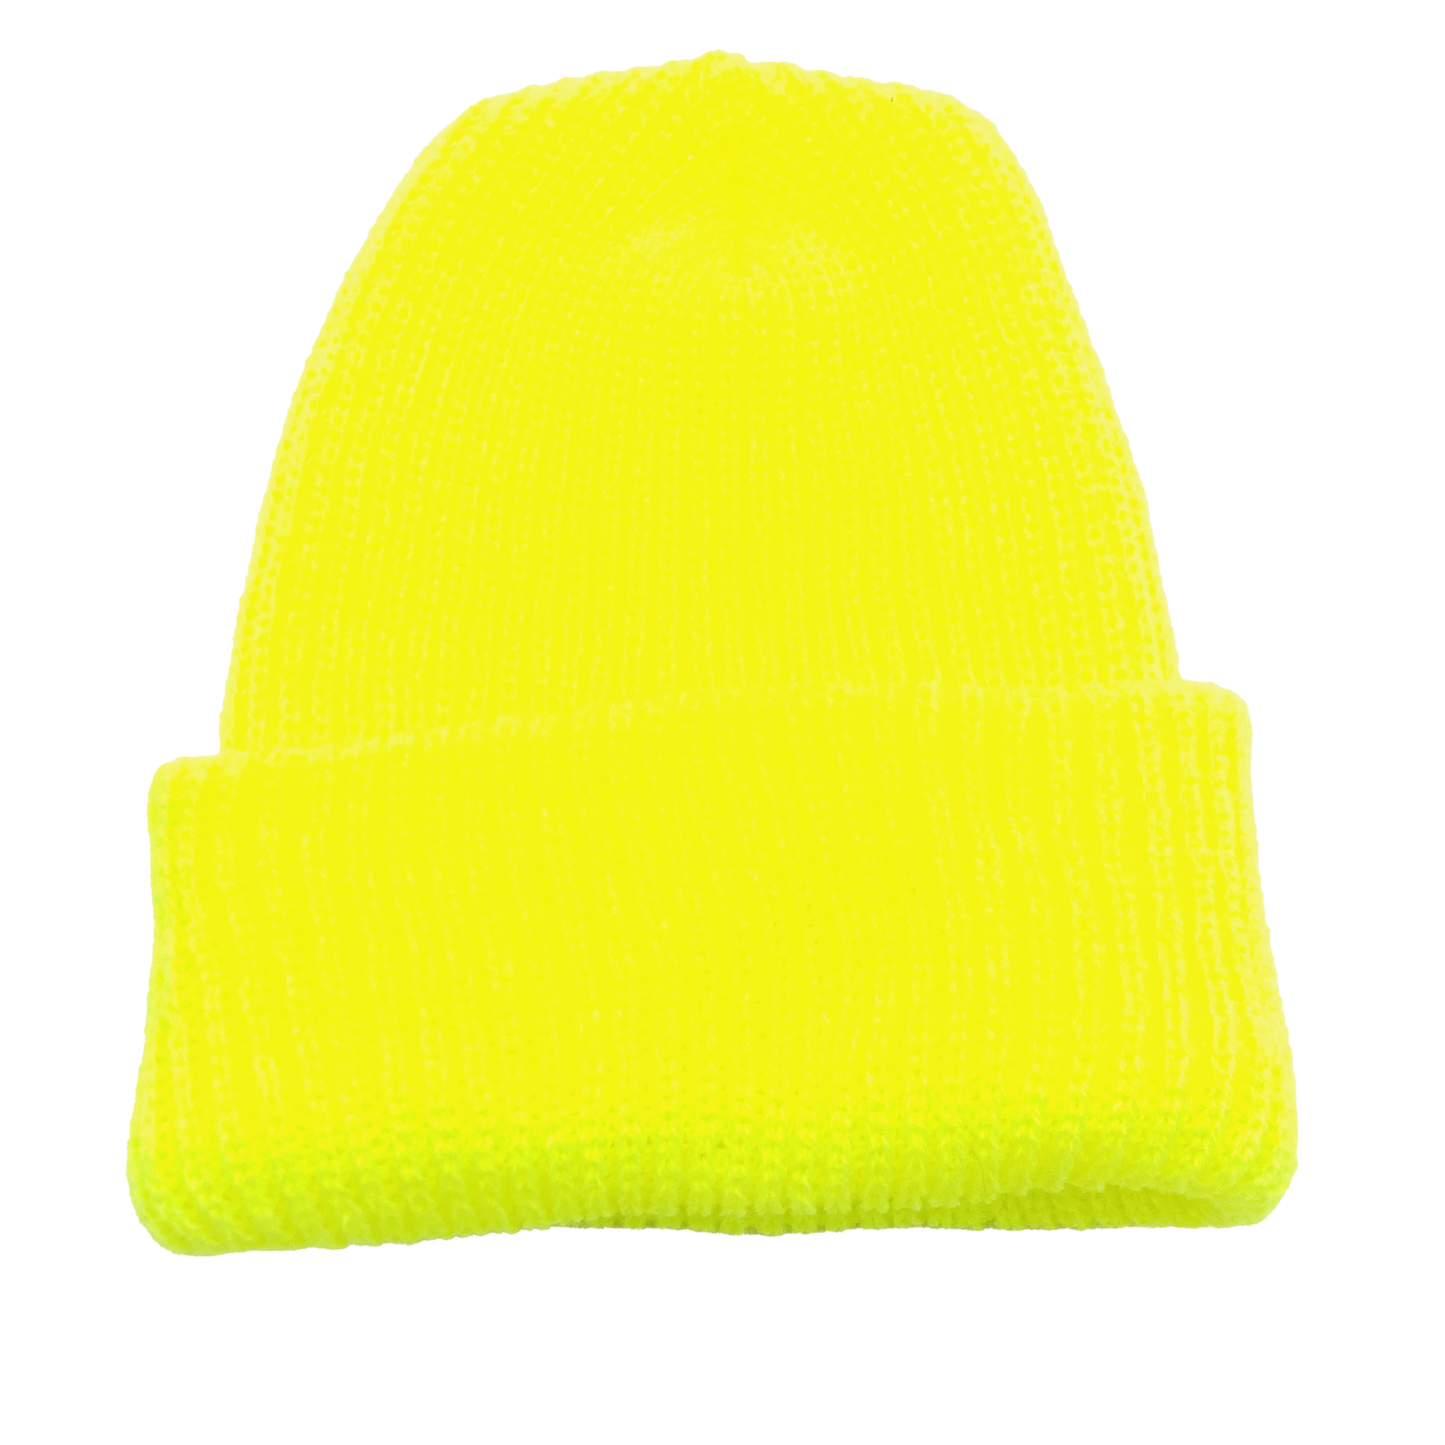 Stocking cap in safety yellow.